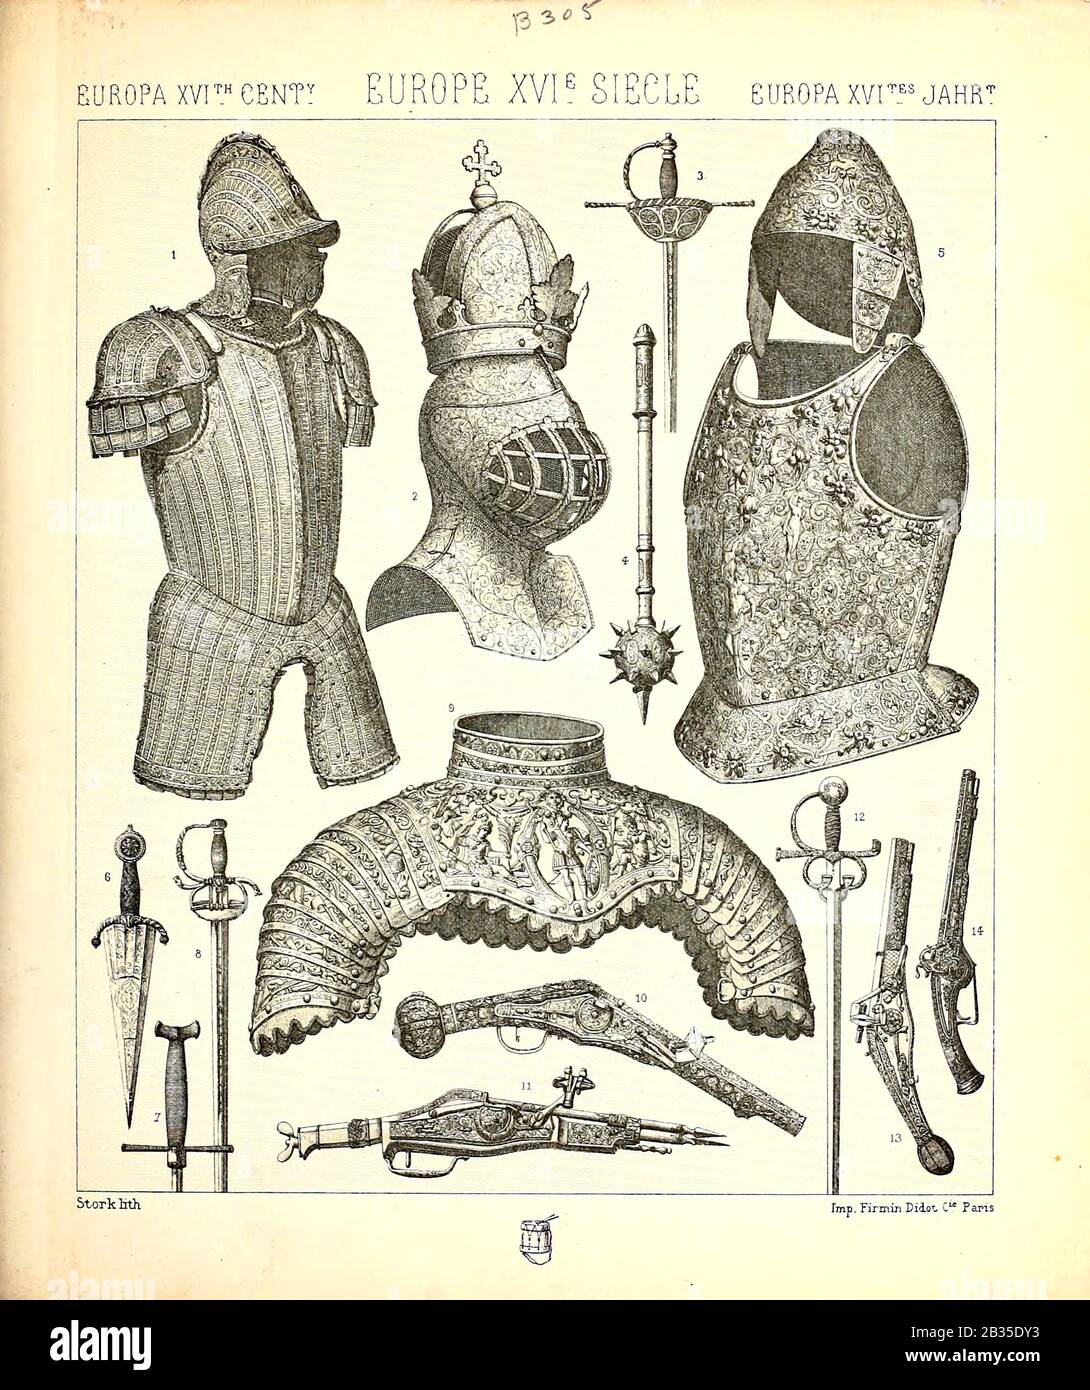 15th century knights and armour illustration from Geschichte des kostums in chronologischer entwicklung (History of the costume in chronological development) by Racinet, A. (Auguste), 1825-1893. and Rosenberg, Adolf, 1850-1906, Volume 3 printed in Berlin in 1888 Stock Photo